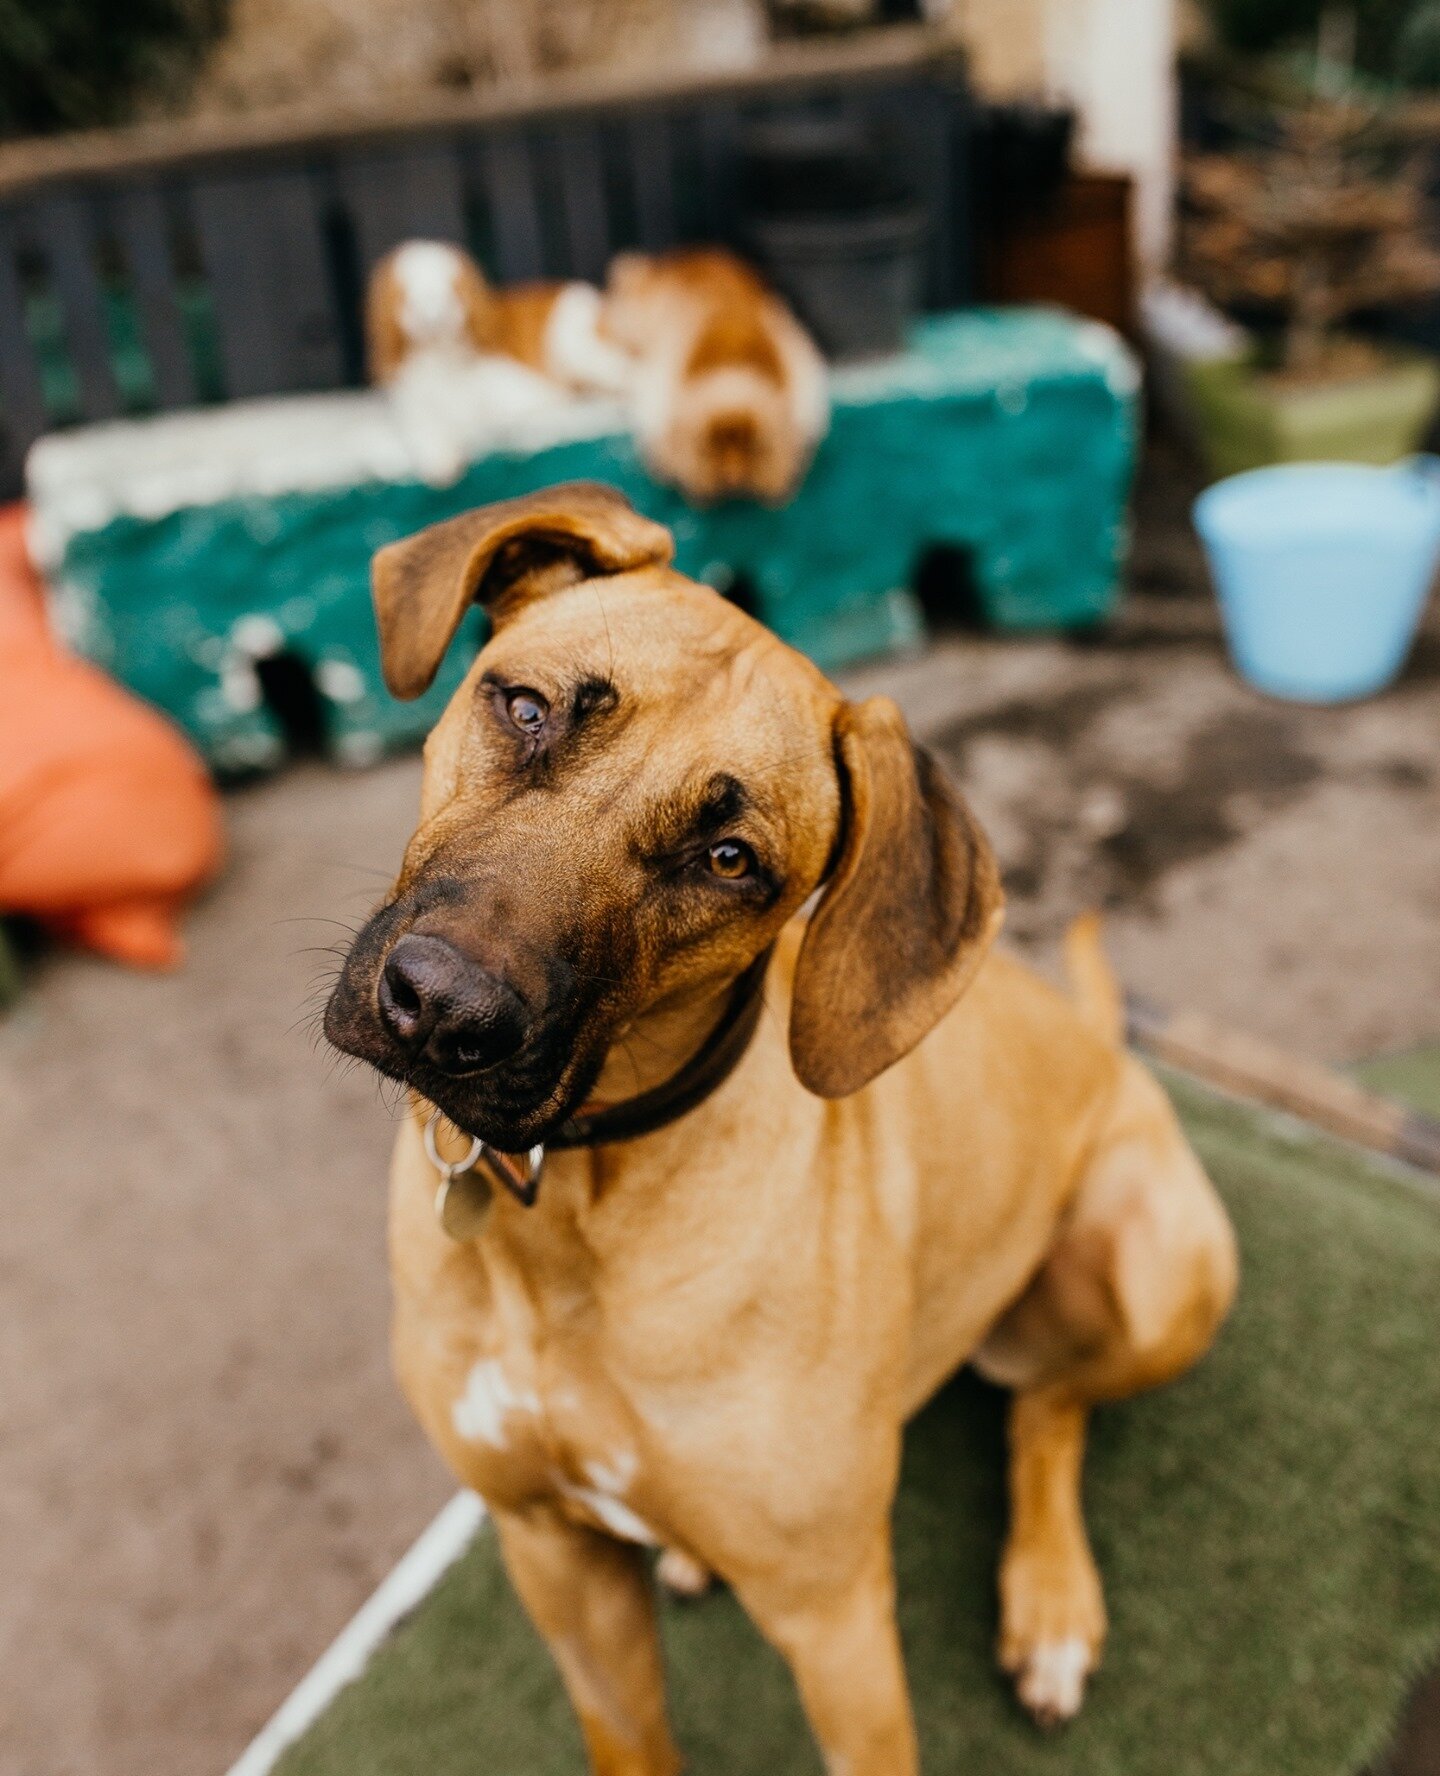 If you are struggling with your dog's behaviour lately and can't pinpoint why - it is likely you need to go back to the basics.⁠
⁠
Problems occur down the line if you don't keep up with the foundation commands like recall, walking to heel, wait.⁠
⁠
I